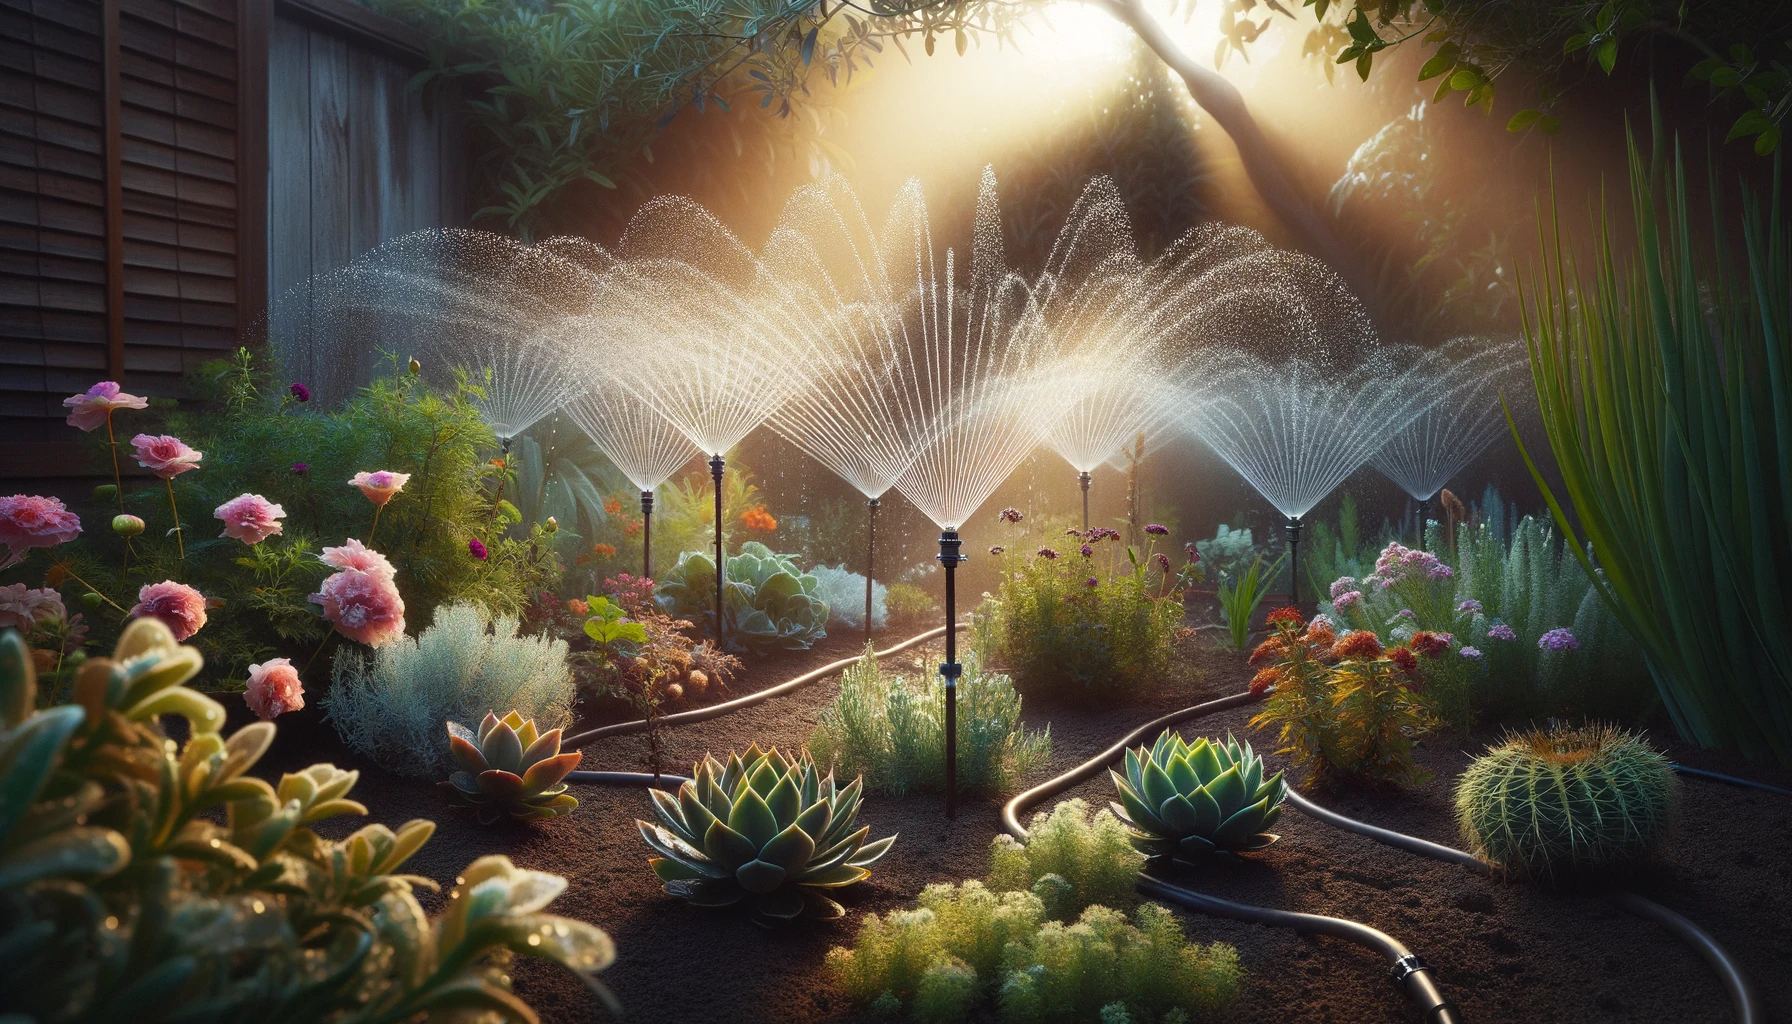 Illuminated garden with sprinklers at sunset.